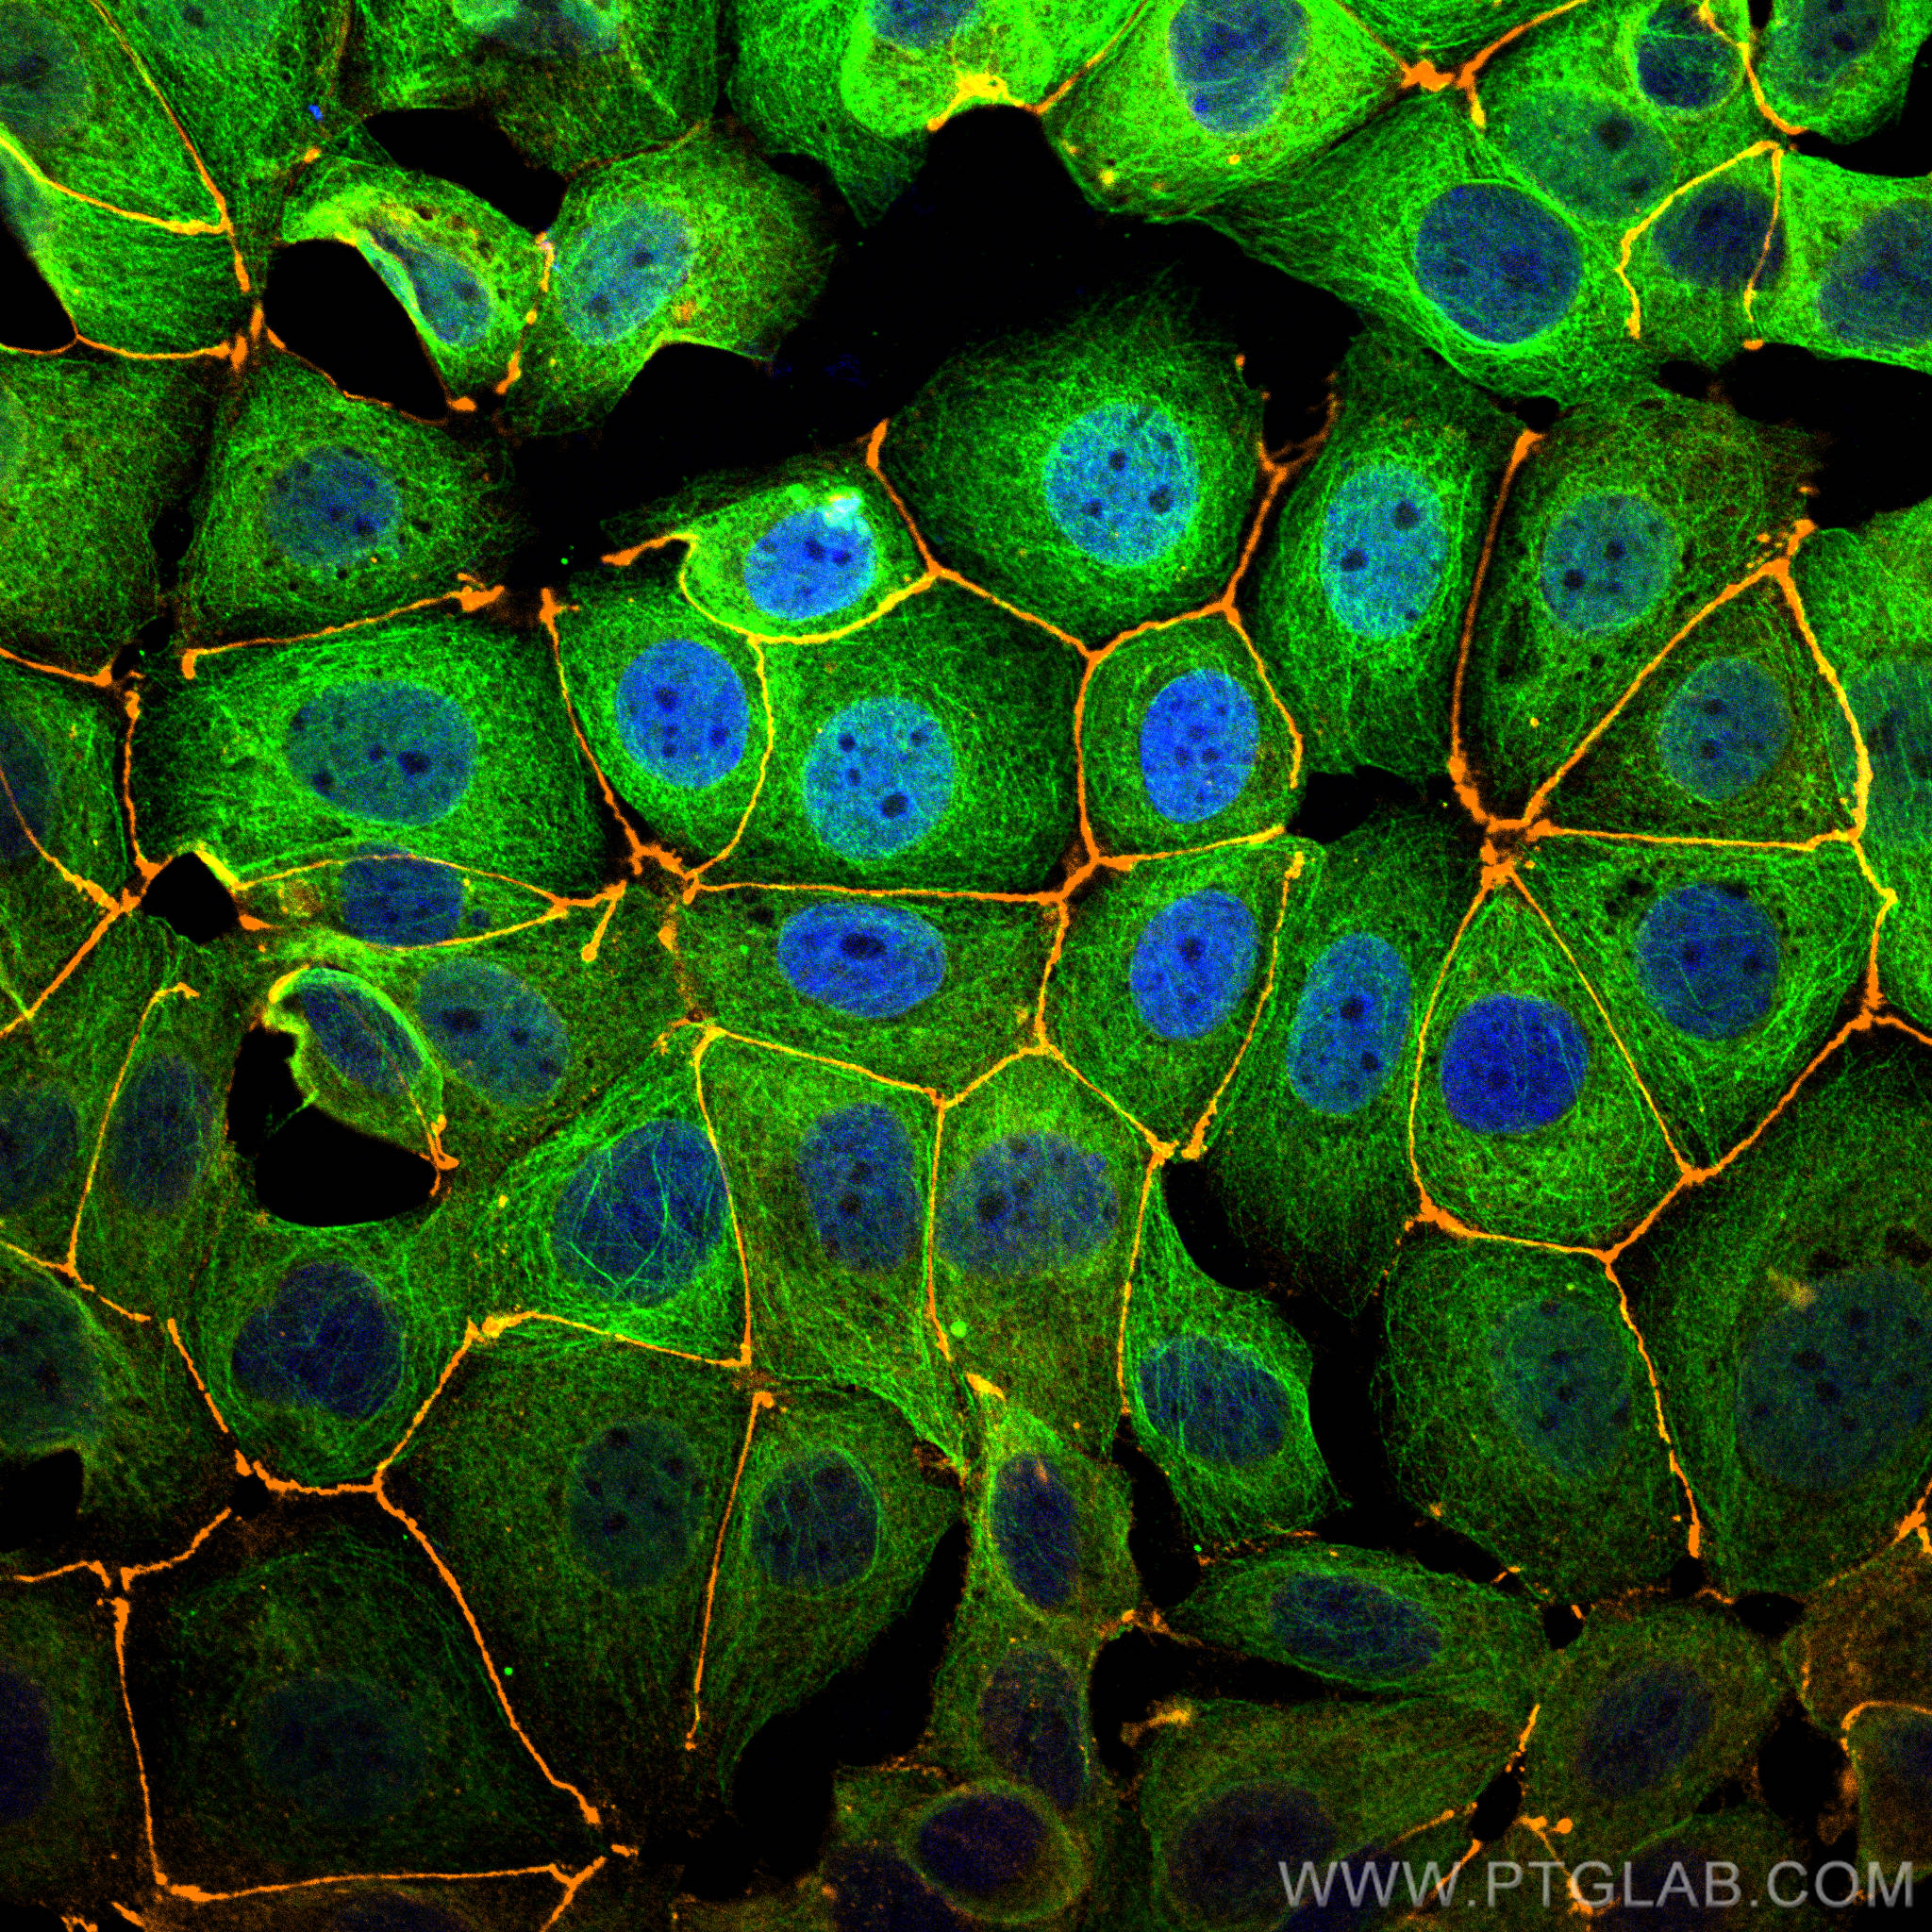 Immunofluorescence of MCF-7 cells: MCF-7 cells were fixed with 4% PFA and stained with Rabbit anti-ZO1 polyclonal antibody (21773-1-AP, 1:2000, orange) and mouse anti-Alpha Tubulin monoclonal antibody (66031-1-Ig, 1:1000, green). Multi-rAb CoraLite® Plus 555-Goat Anti-Rabbit Recombinant Secondary Antibody (H+L) (RGAR003, 1:500) and Multi-rAb CoraLite® Plus 488-Goat Anti-Mouse Recombinant Secondary Antibody (H+L) (RGAM002, 1:500) were used for detection